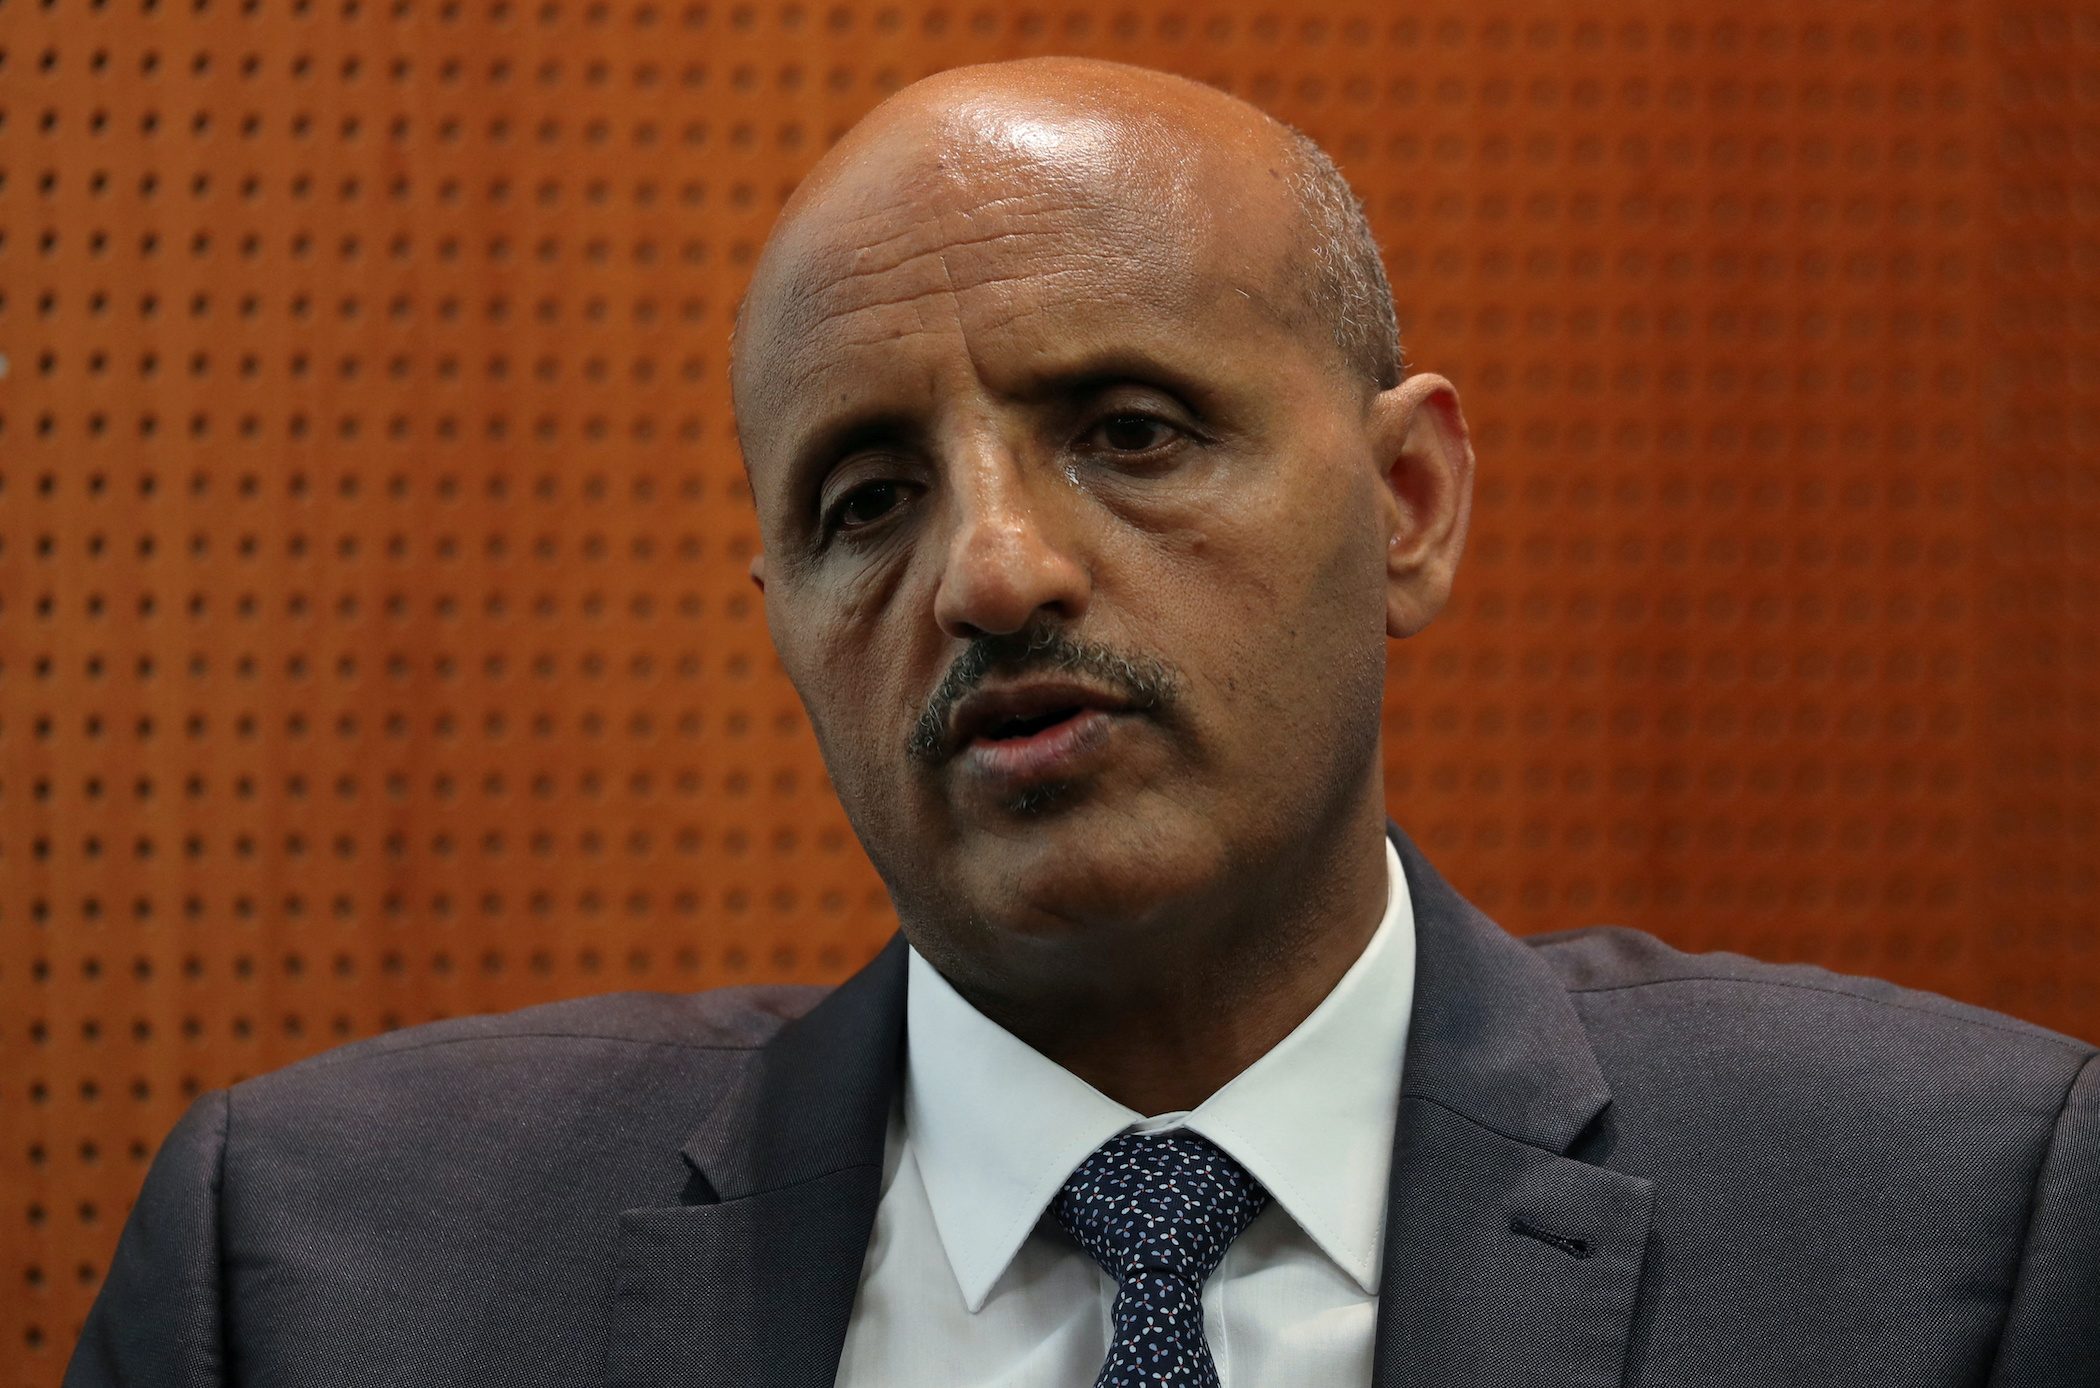 Ethiopian Airlines CEO resigns over health issues